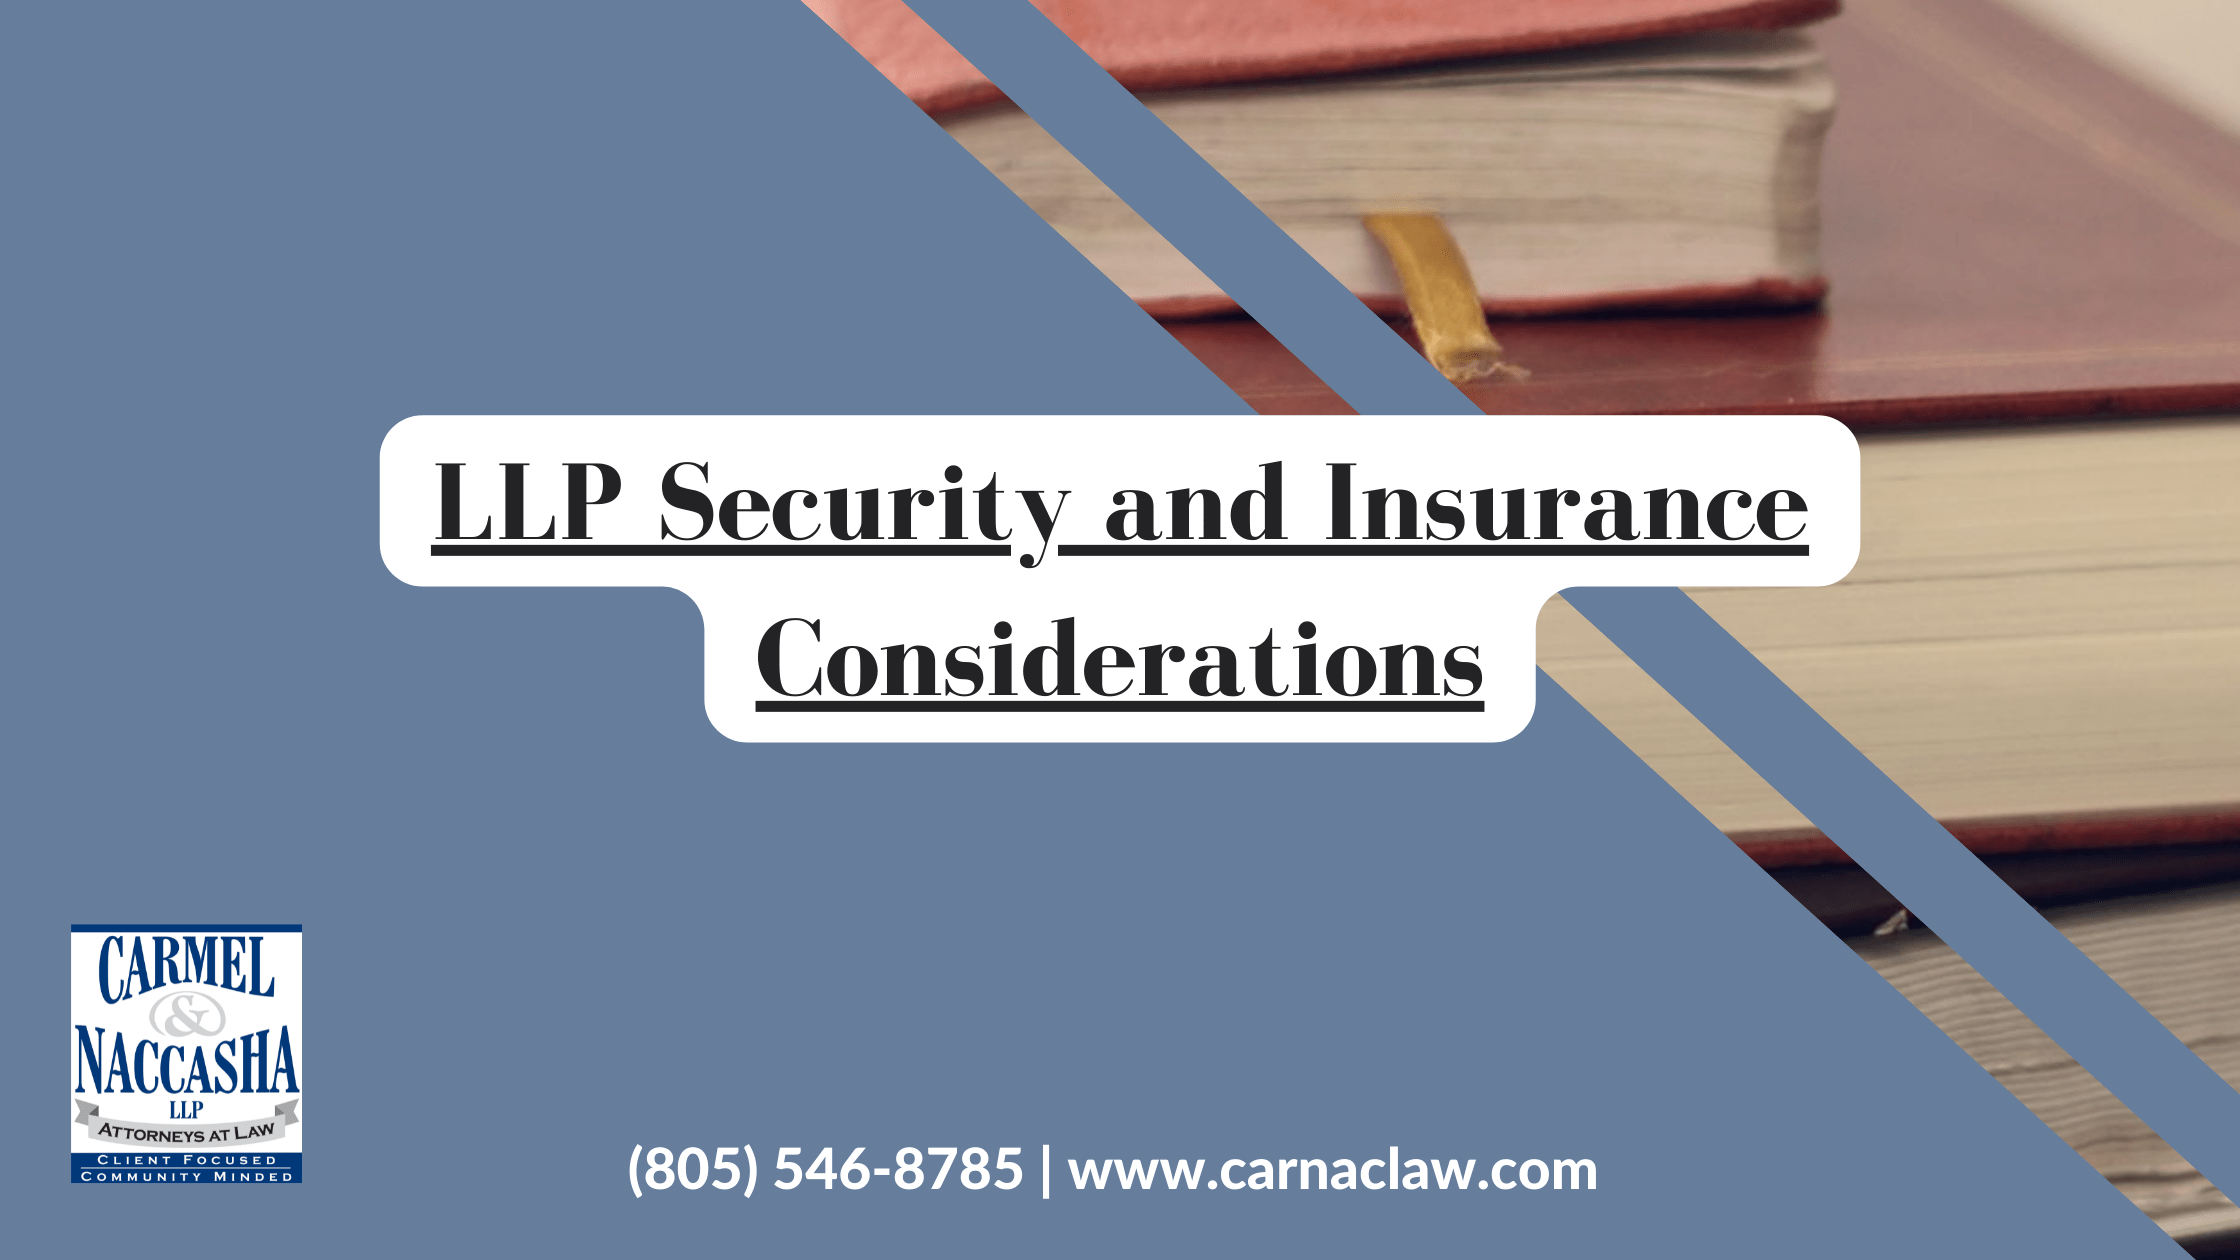 LLP Security and Insurance Considerations